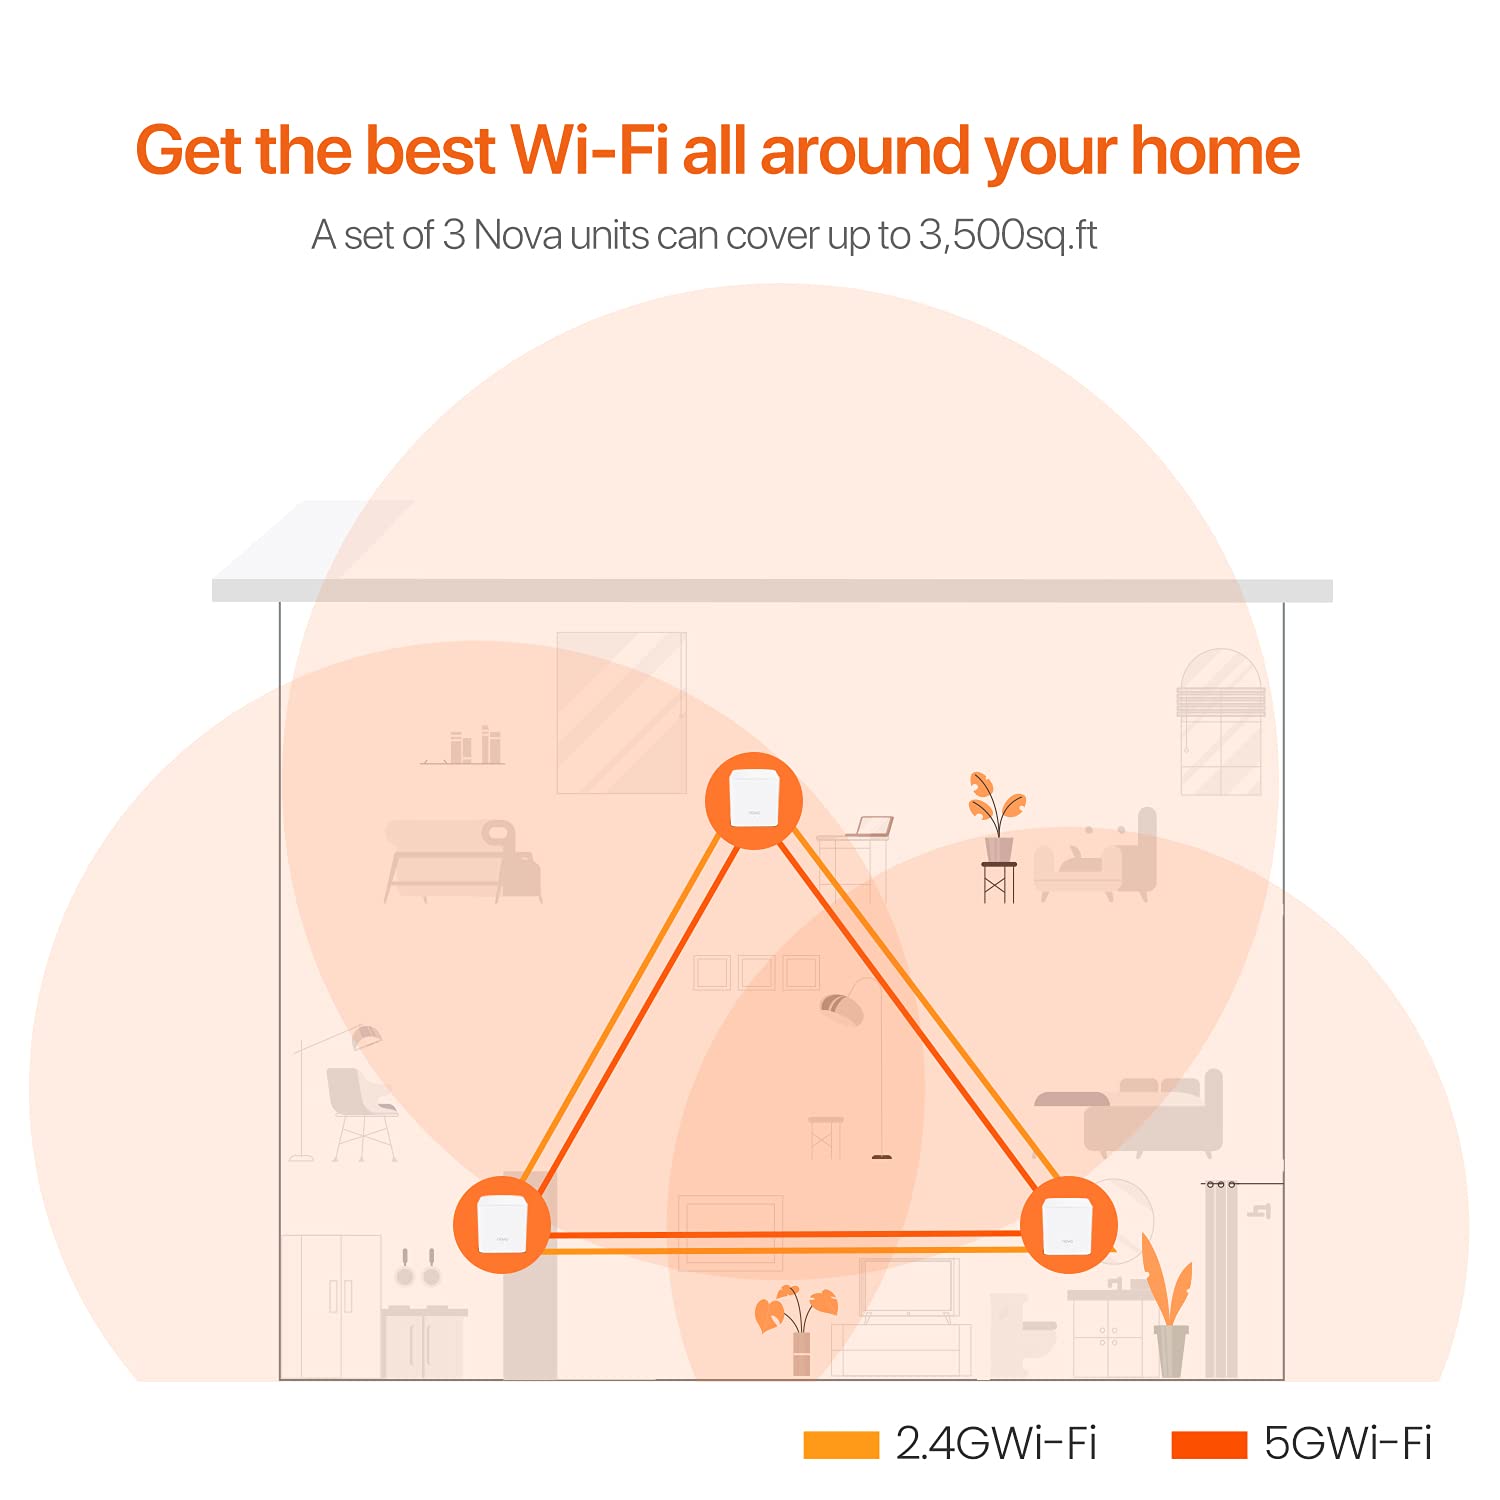 Tenda Nova Mesh WiFi System MW3 - Covers up to 3500 sq.ft - AC1200 Whole Home WiFi Mesh System - Dual-Band Mesh Network for Home Internet - Replace WiFi Router and Extender - Parental Control - 3-Pack